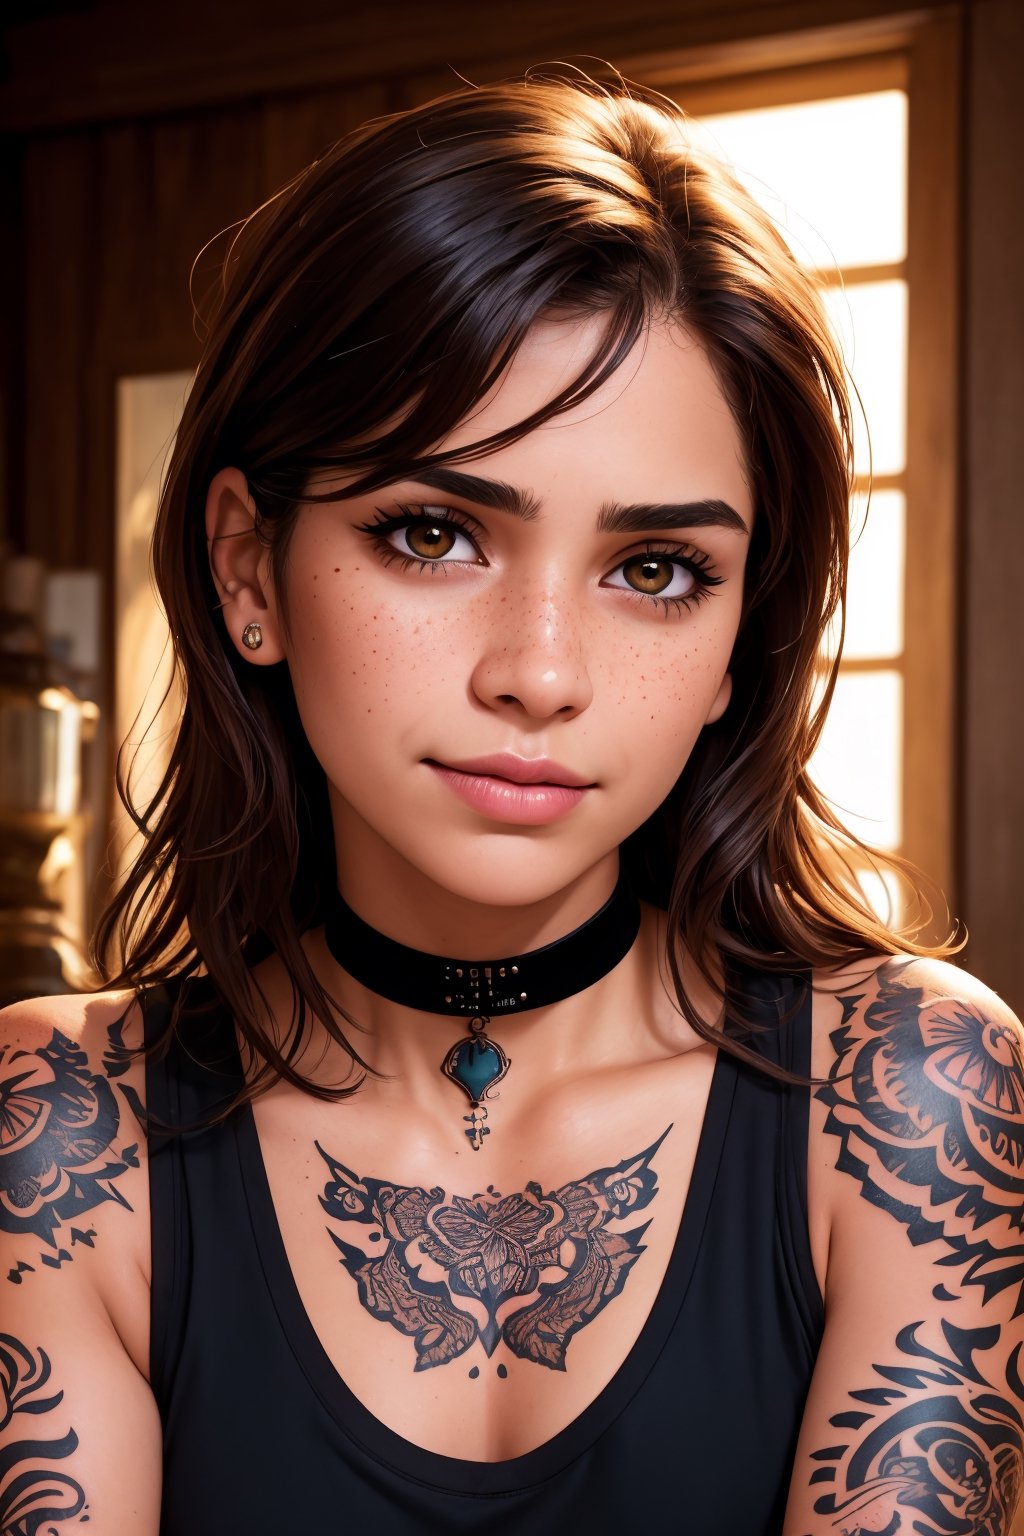 photo, rule of thirds, dramatic lighting, medium hair, detailed face, detailed nose, woman wearing tank top, freckles, collar or choker, smirk, tattoo, intricate background
,realism,realistic,raw,analog,woman,portrait,photorealistic,analog,realism,Indian ,Pakistani 